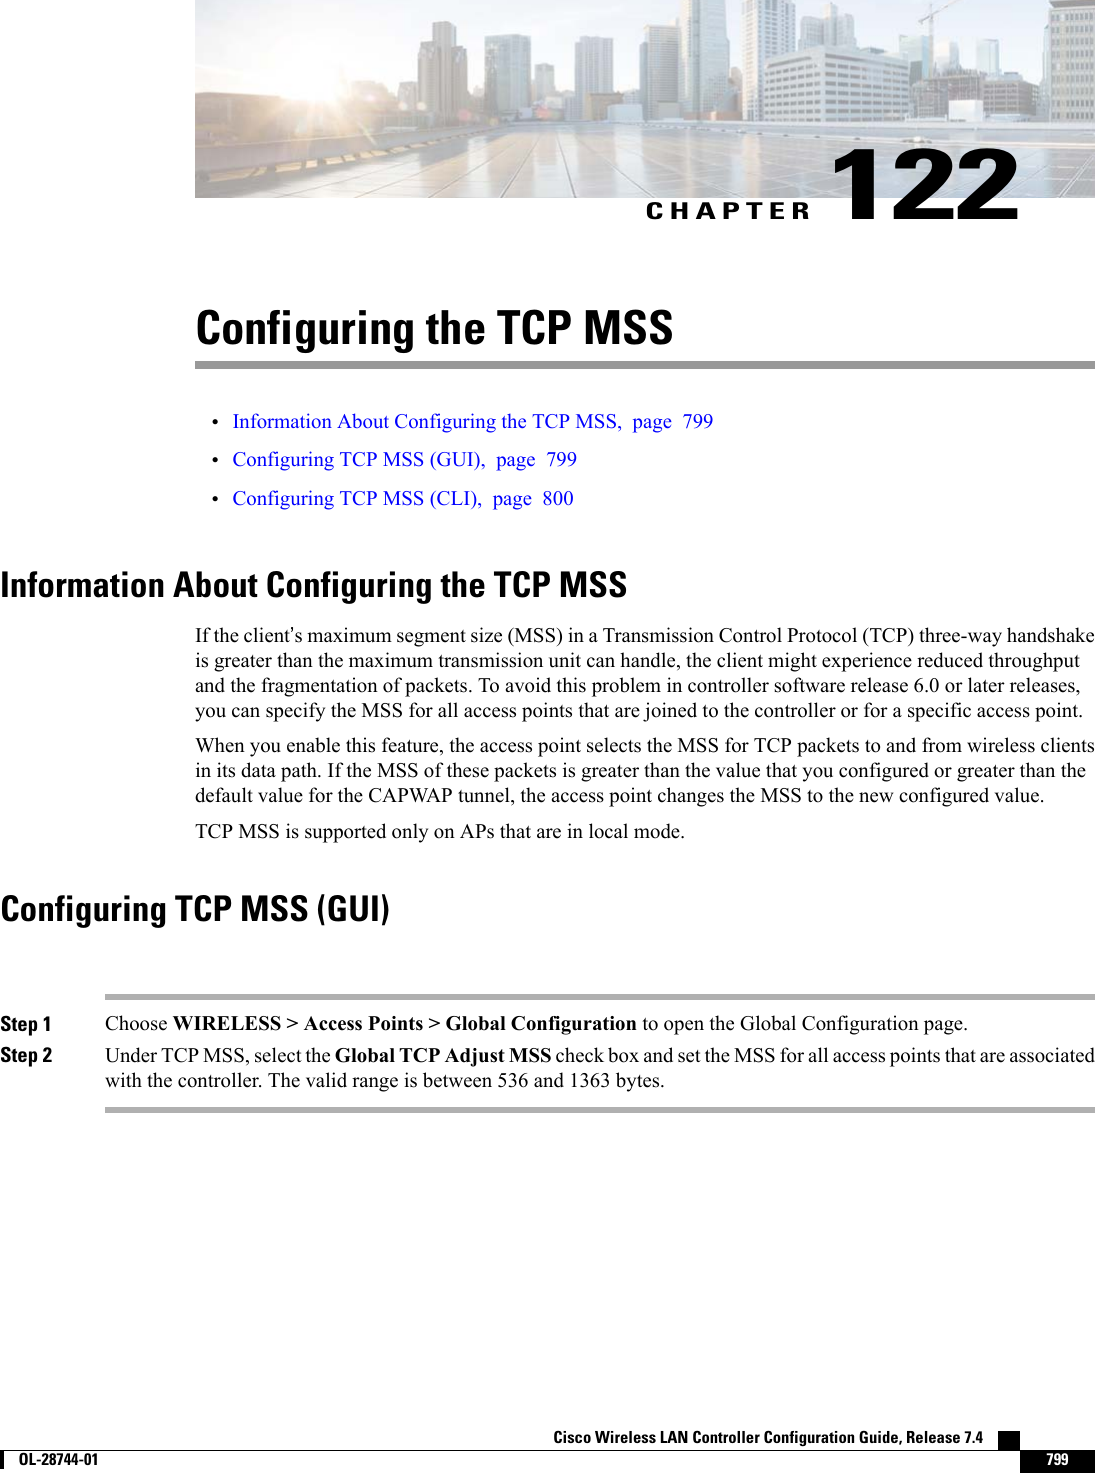 CHAPTER 122Configuring the TCP MSS•Information About Configuring the TCP MSS, page 799•Configuring TCP MSS (GUI), page 799•Configuring TCP MSS (CLI), page 800Information About Configuring the TCP MSSIf the client’s maximum segment size (MSS) in a Transmission Control Protocol (TCP) three-way handshakeis greater than the maximum transmission unit can handle, the client might experience reduced throughputand the fragmentation of packets. To avoid this problem in controller software release 6.0 or later releases,you can specify the MSS for all access points that are joined to the controller or for a specific access point.When you enable this feature, the access point selects the MSS for TCP packets to and from wireless clientsin its data path. If the MSS of these packets is greater than the value that you configured or greater than thedefault value for the CAPWAP tunnel, the access point changes the MSS to the new configured value.TCP MSS is supported only on APs that are in local mode.Configuring TCP MSS (GUI)Step 1 Choose WIRELESS &gt; Access Points &gt; Global Configuration to open the Global Configuration page.Step 2 Under TCP MSS, select the Global TCP Adjust MSS check box and set the MSS for all access points that are associatedwith the controller. The valid range is between 536 and 1363 bytes.Cisco Wireless LAN Controller Configuration Guide, Release 7.4        OL-28744-01 799